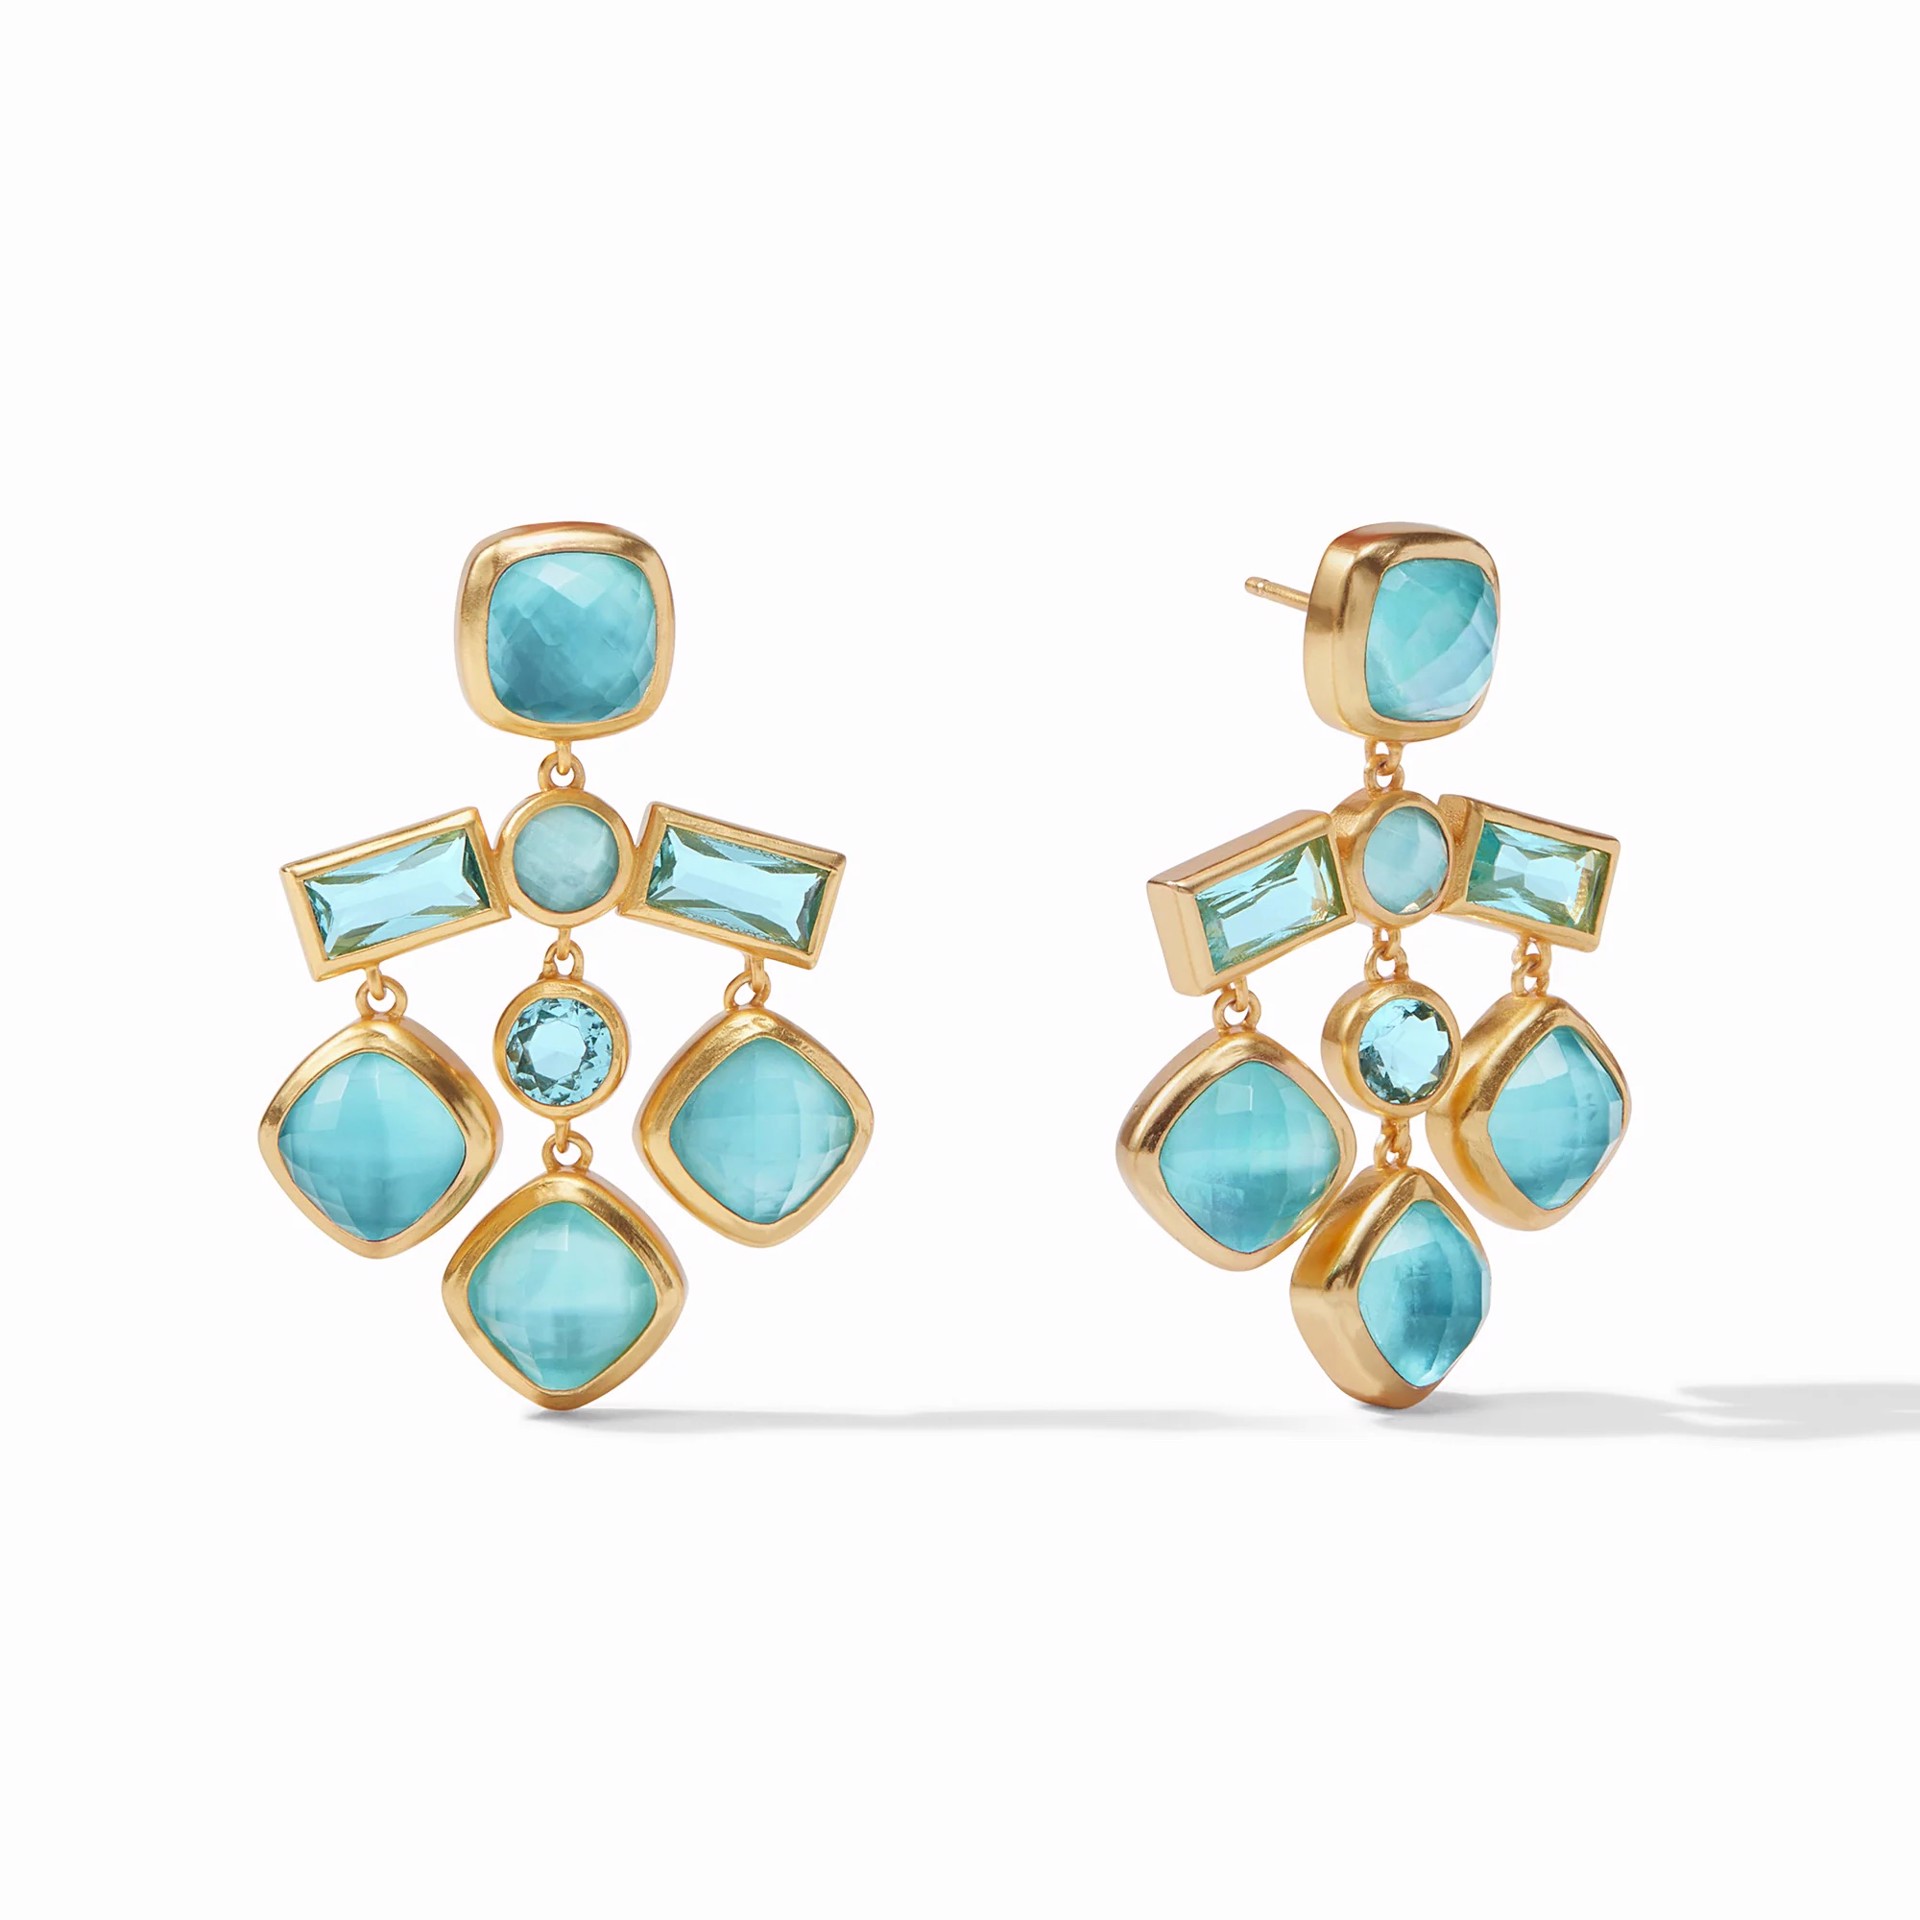 Antonia Chandelier Earring - Bahamian Blue by Julie Vos